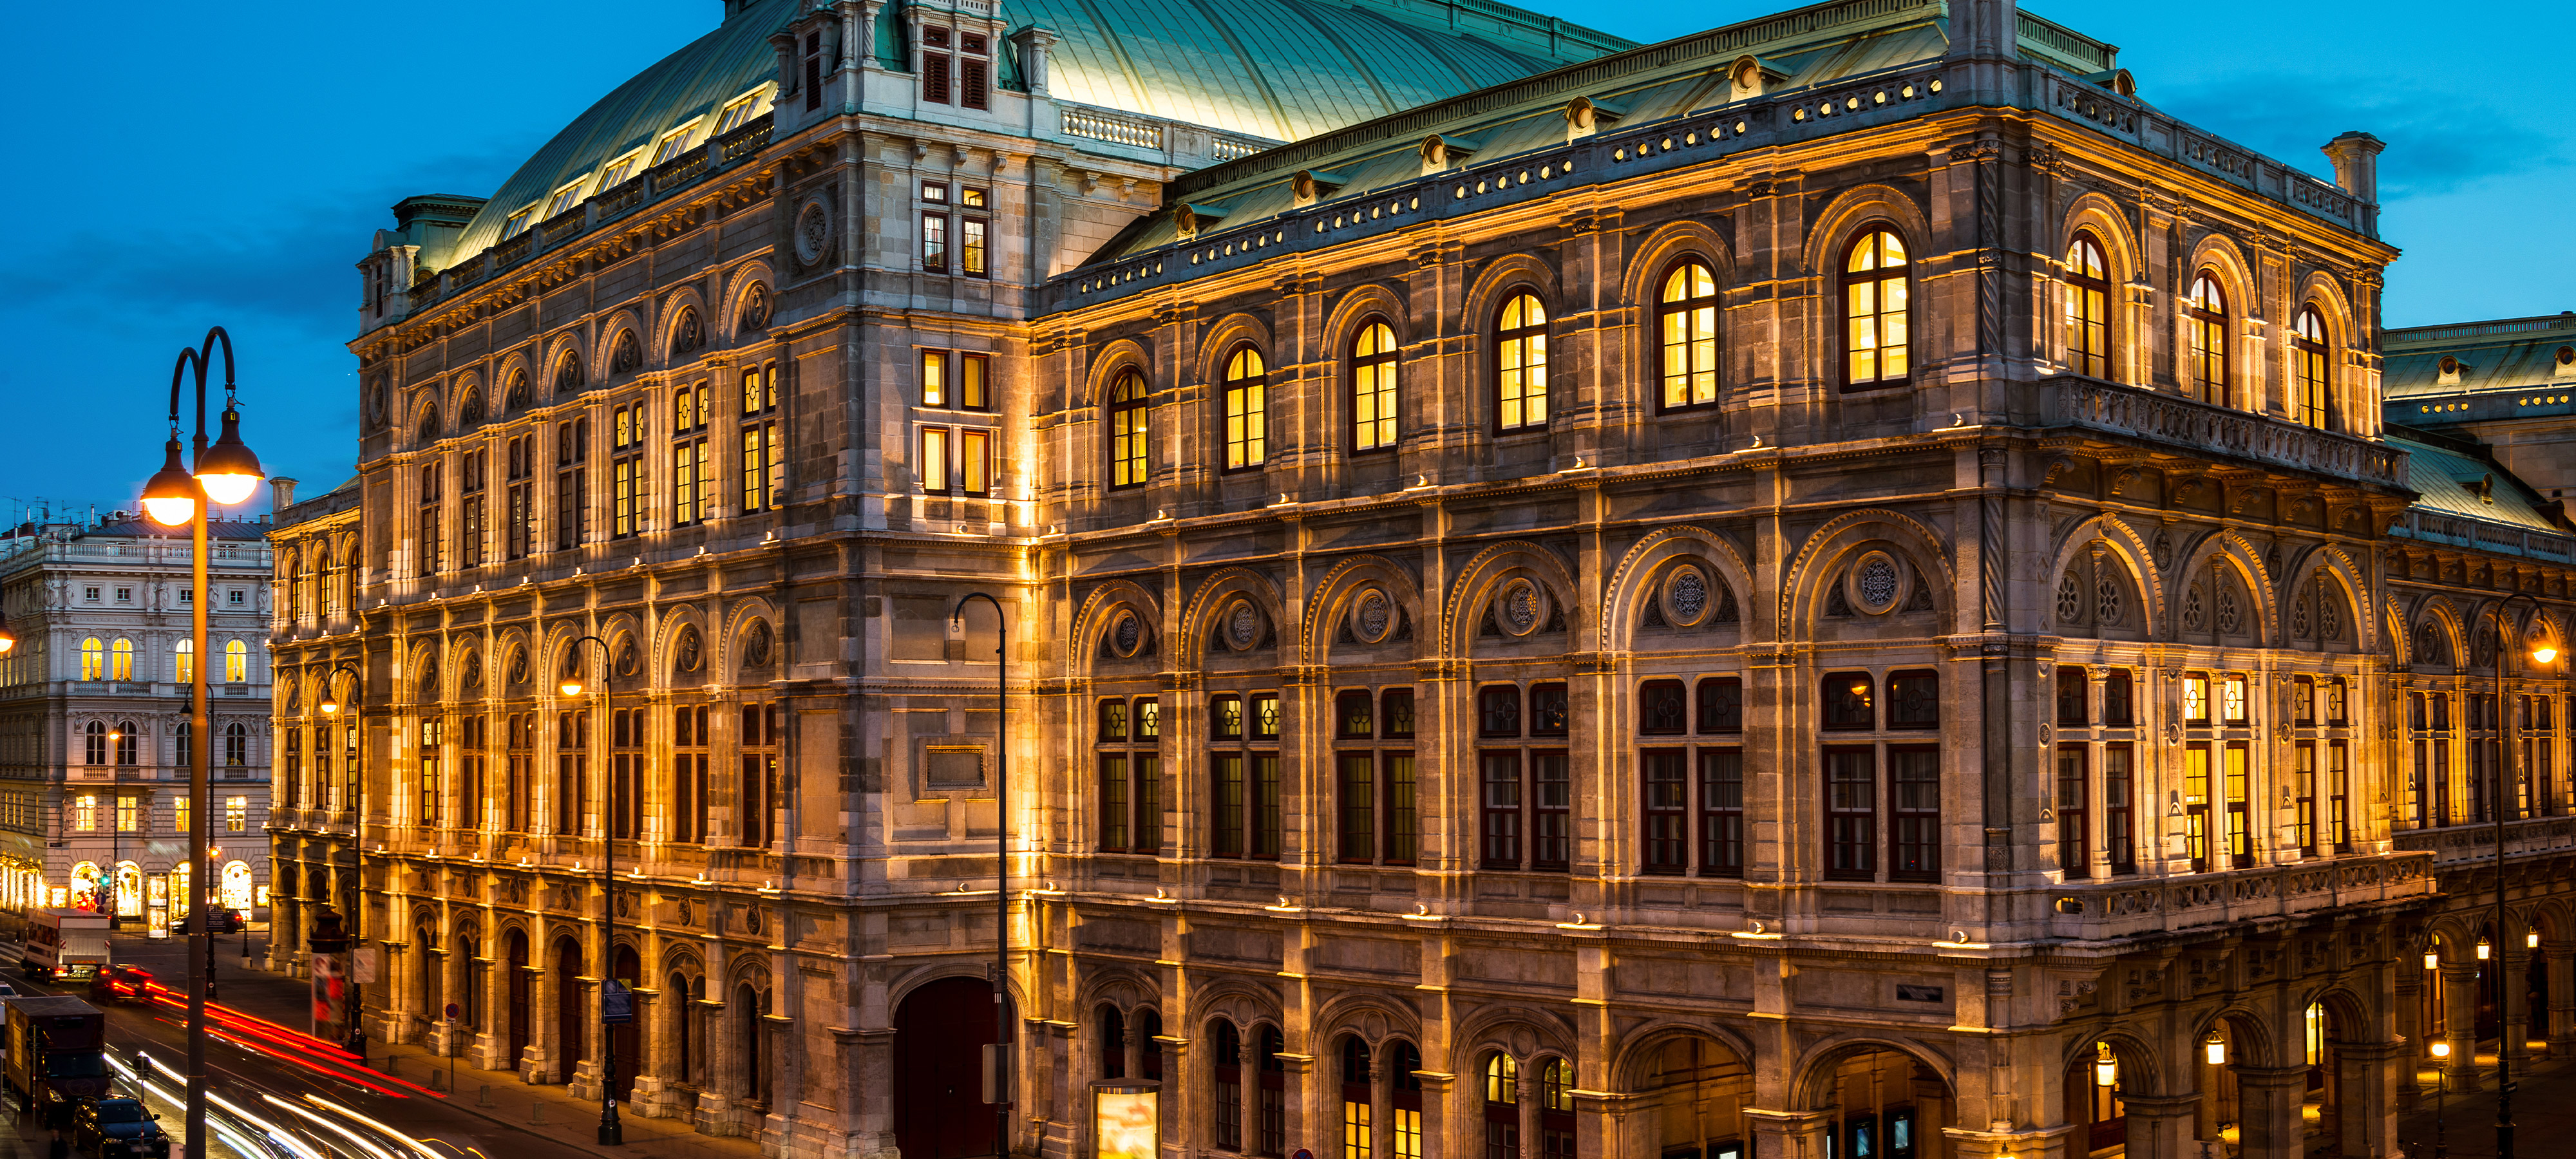 A nighttime view of the Wiener Staatsoper (Vienna State Opera) in Vienna, Austria. The Neo-Renaissance building is warmly lit, inside and out. Light from traffic appears as red and white streaks in the left foreground.